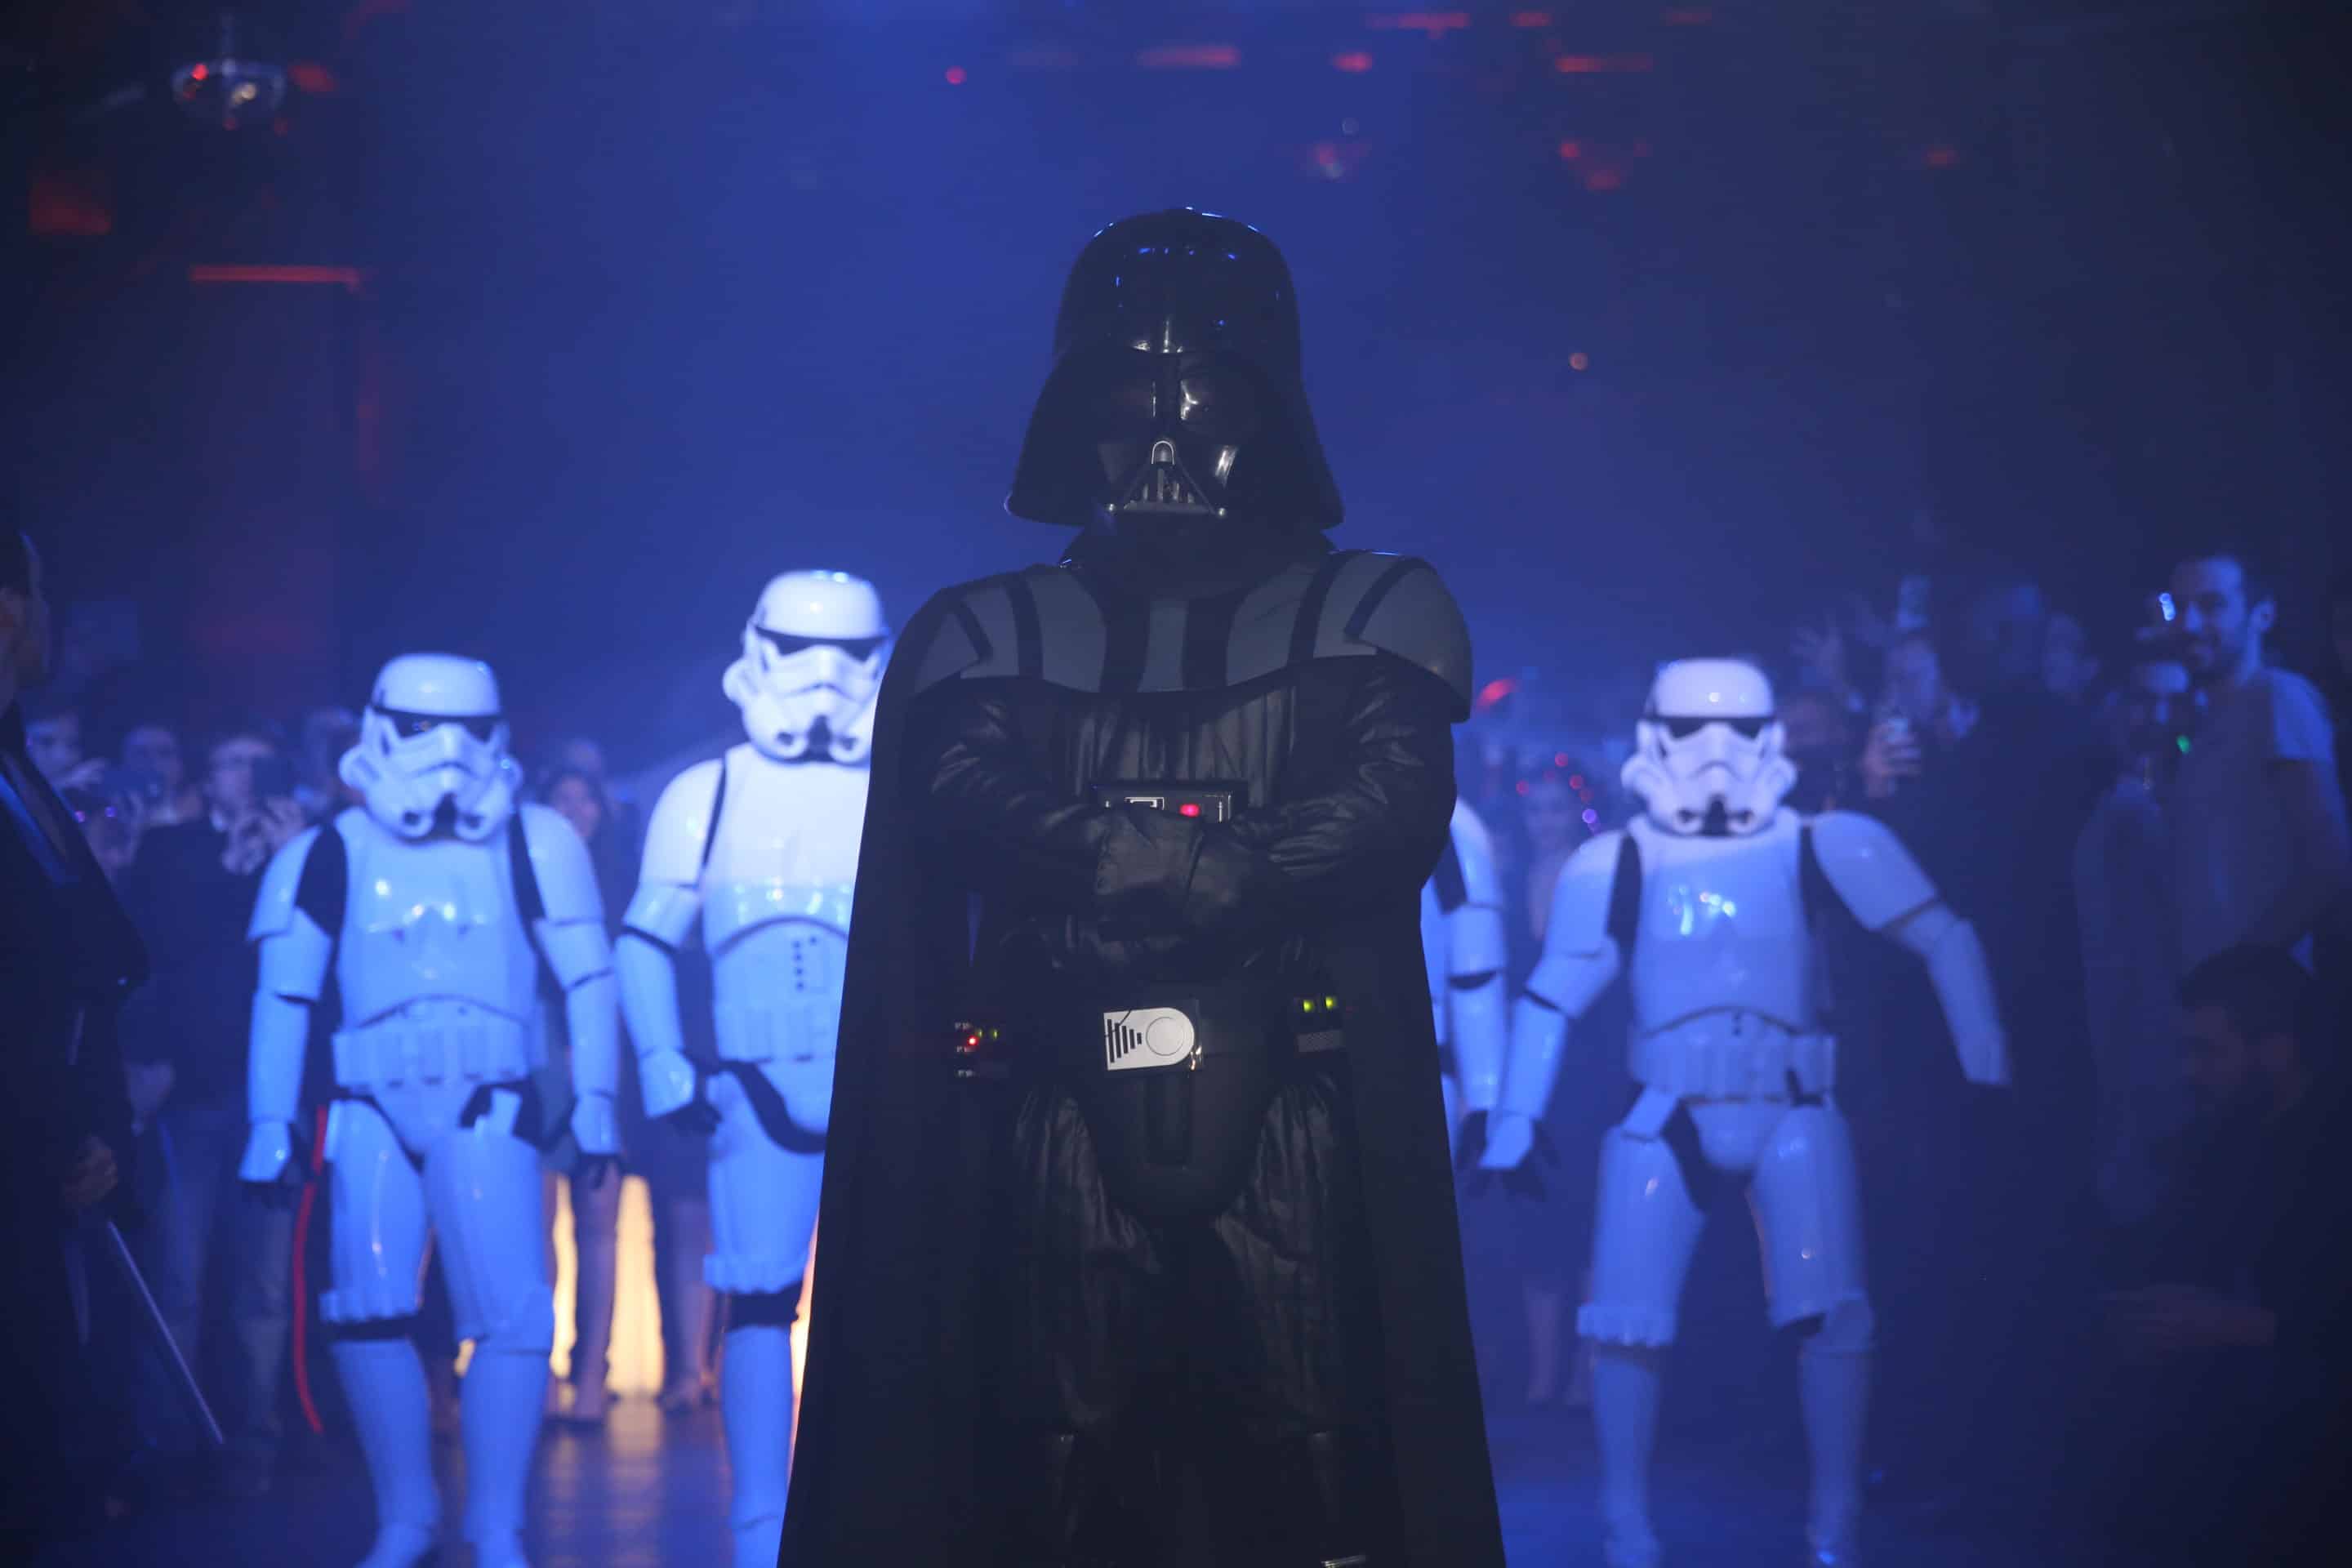 dark vador stormtroopers choregraphie danse star wars paris theme dark vador icdc agence wato we are the oracle evenementielle events